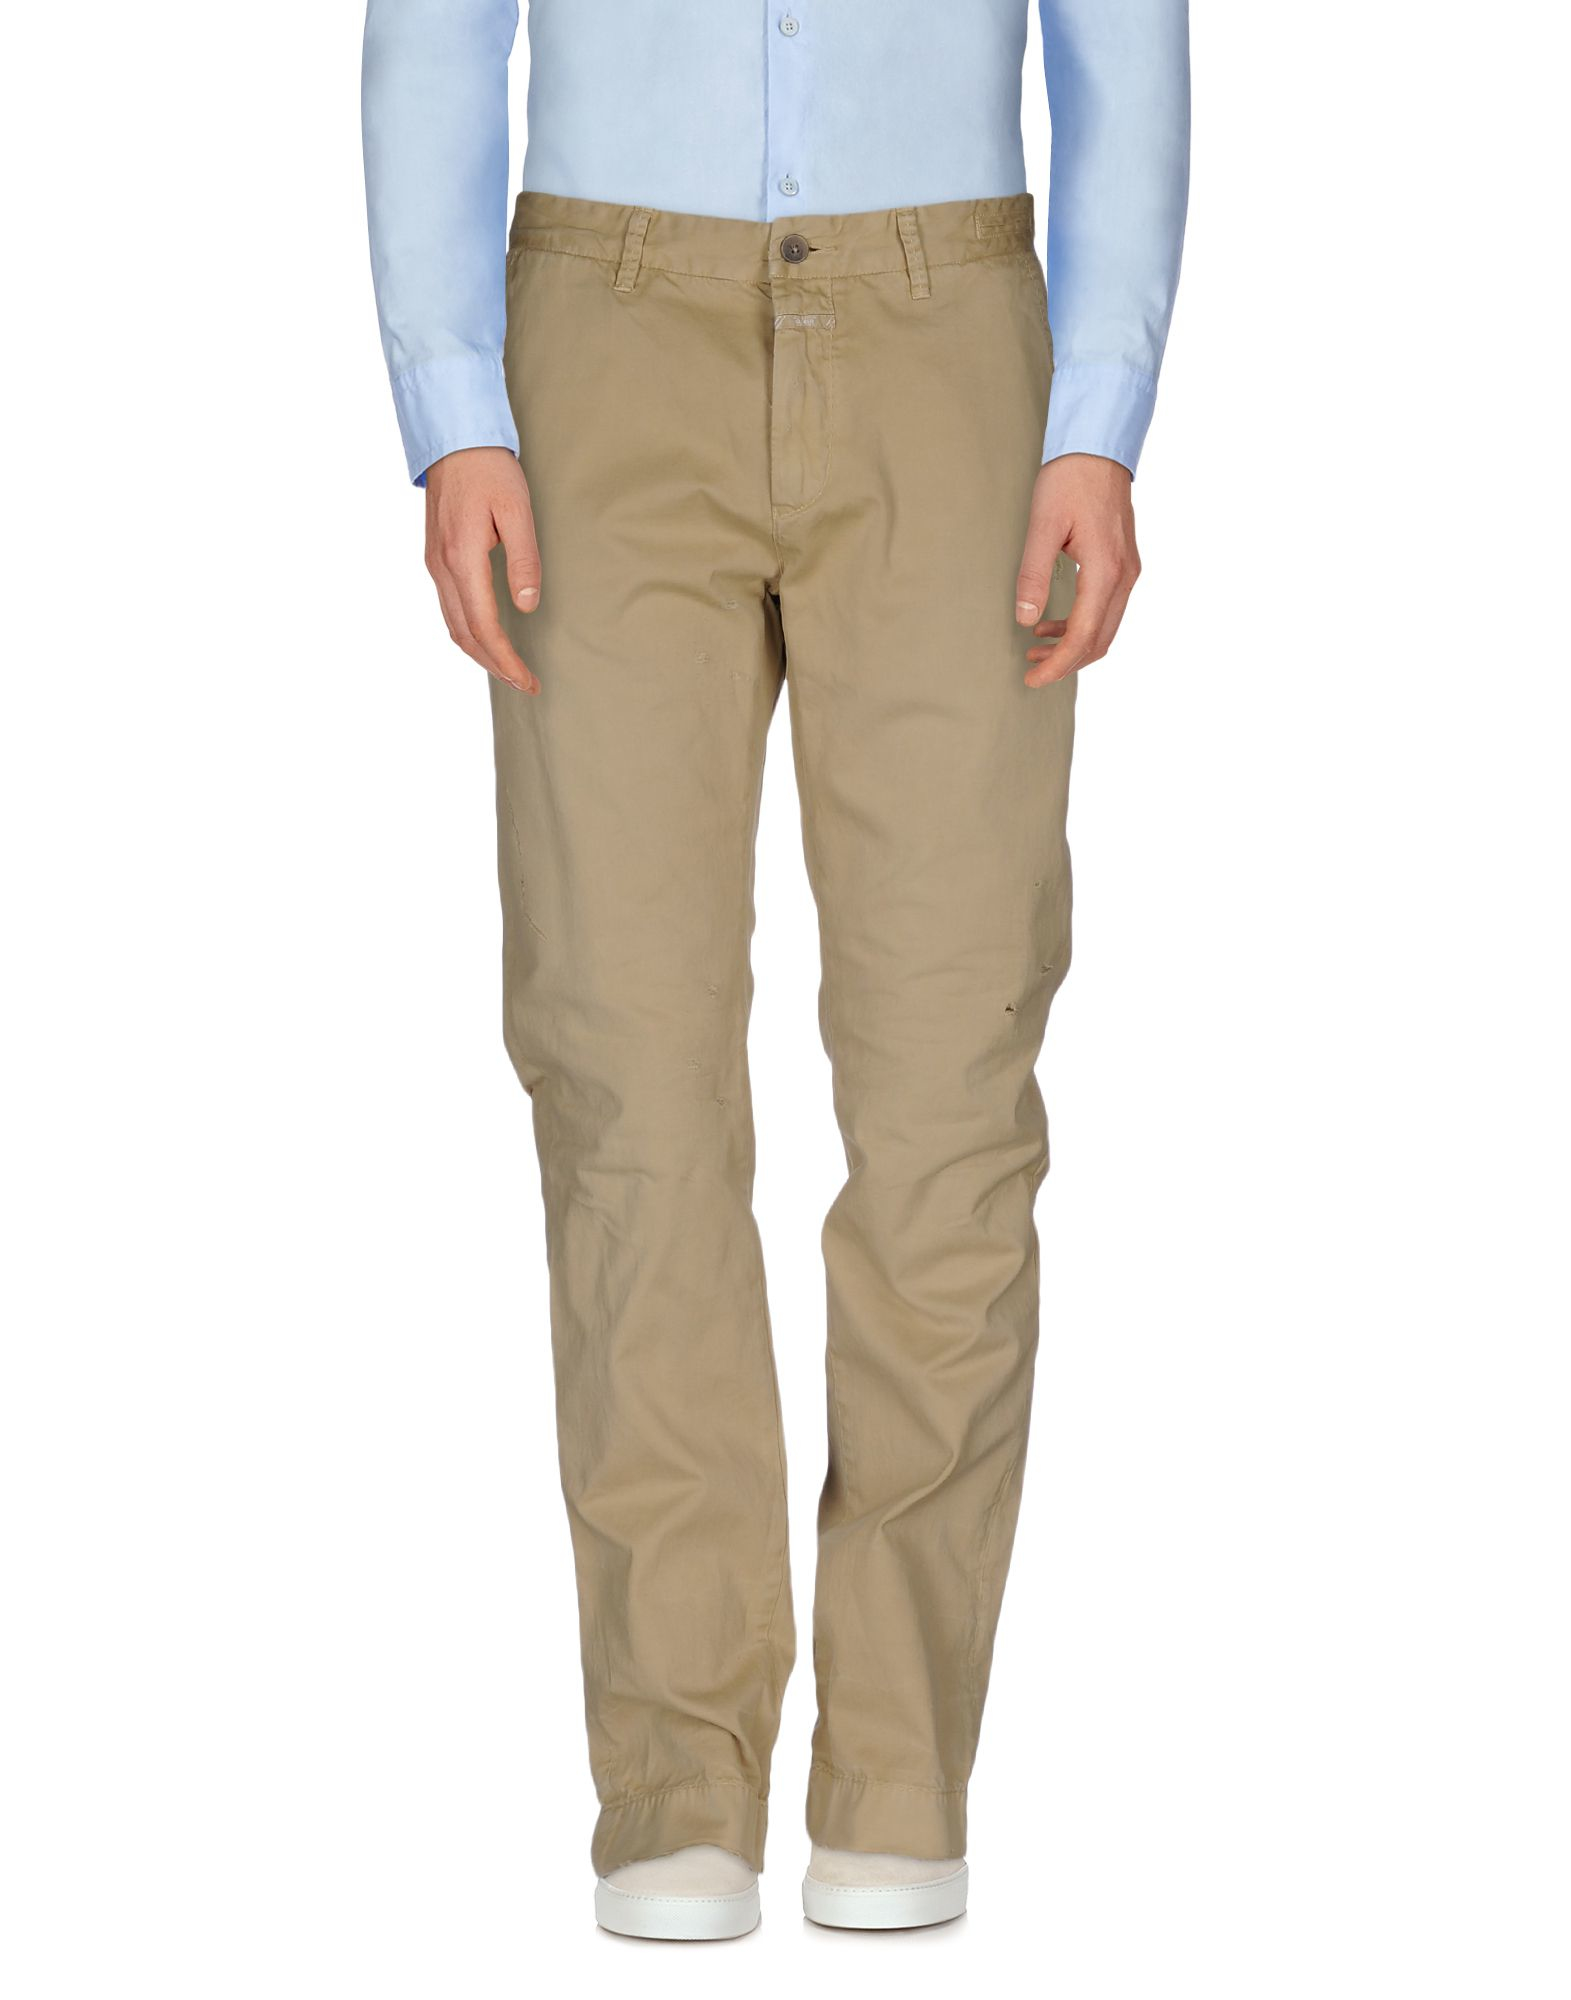 Closed Cotton Casual Pants in Natural for Men - Lyst